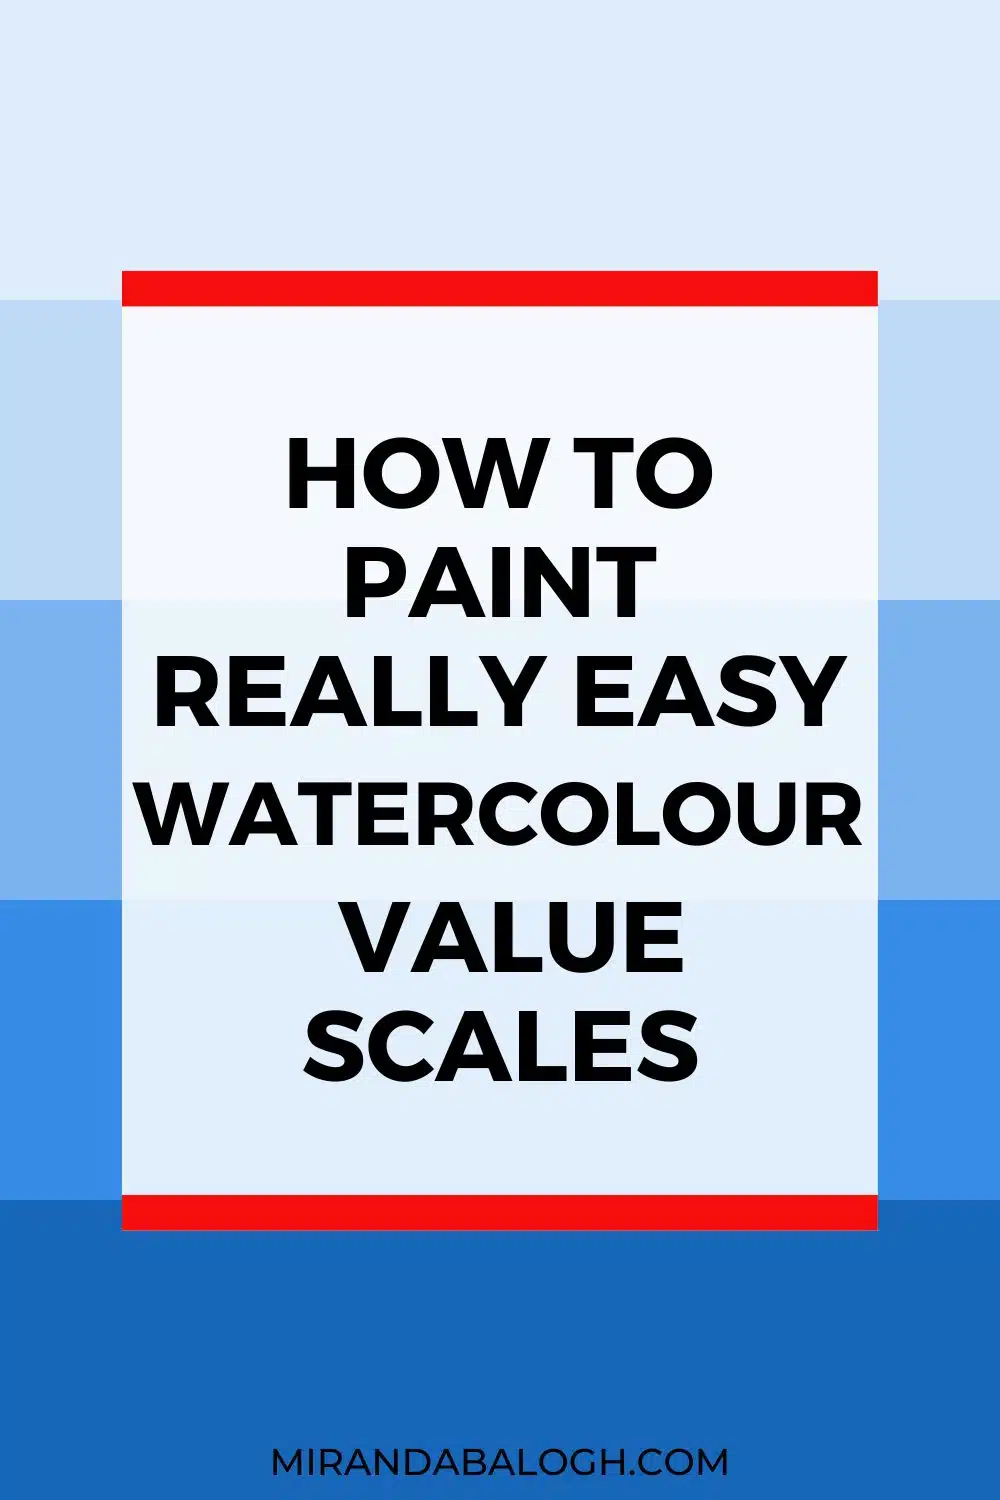 In this tutorial, you learn how to paint watercolour value scales step by step. By learning how to use the paint-to-water ratio correctly, you can create value studies that help you master the value scale. Once you know the basics, you’ll have a solid understanding of how to use value in a watercolour painting. So take out your art supplies and come paint with me to learn how to create a value scale!